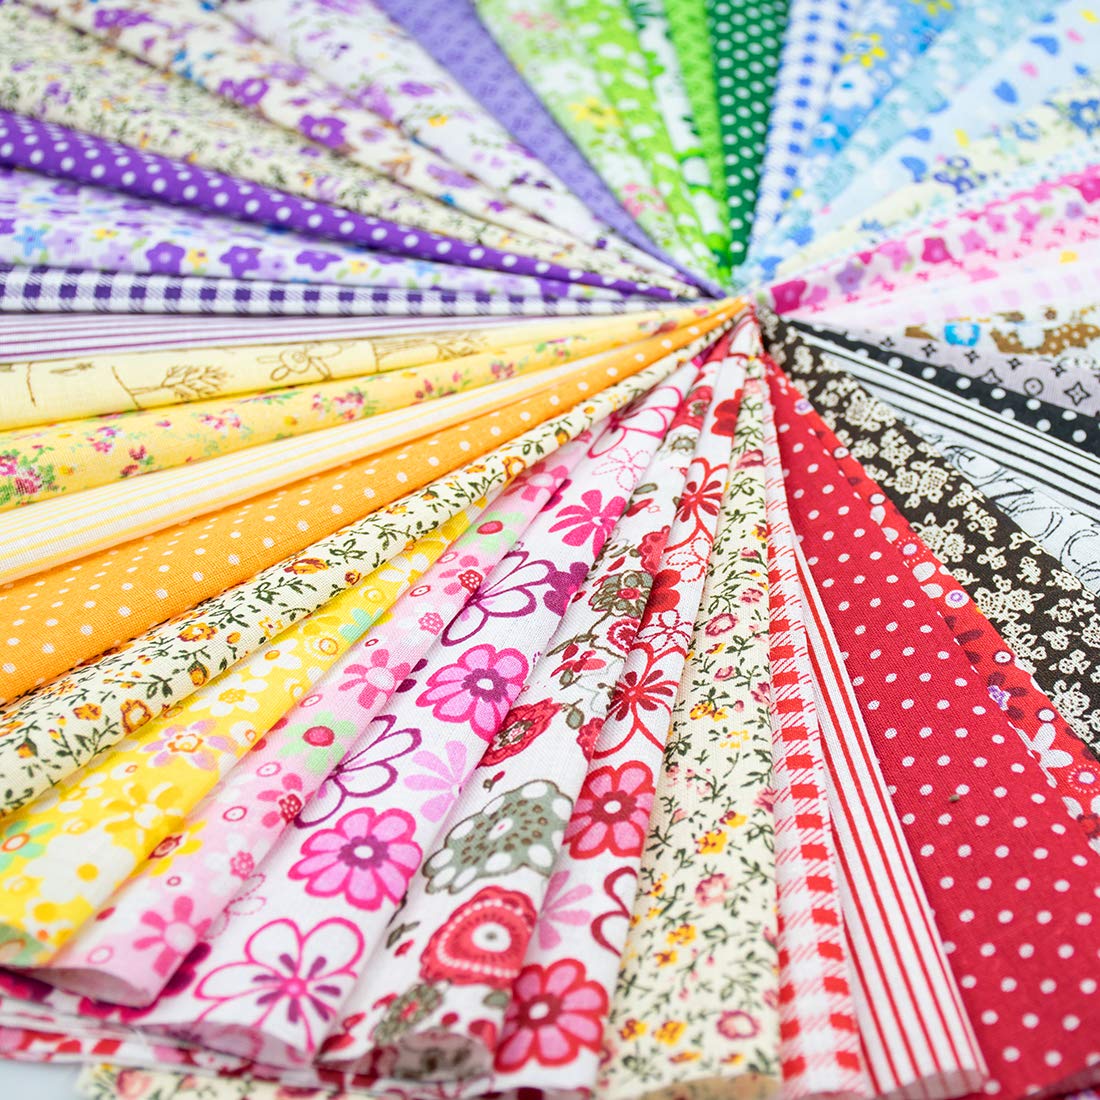 Foraineam 300Pcs 4" x 4" (10cm x 10cm) 60 Designs Assorted Cotton Craft Fabric Bundle Printed Patchwork Squares for DIY Sewing Quilting Scrapbooking